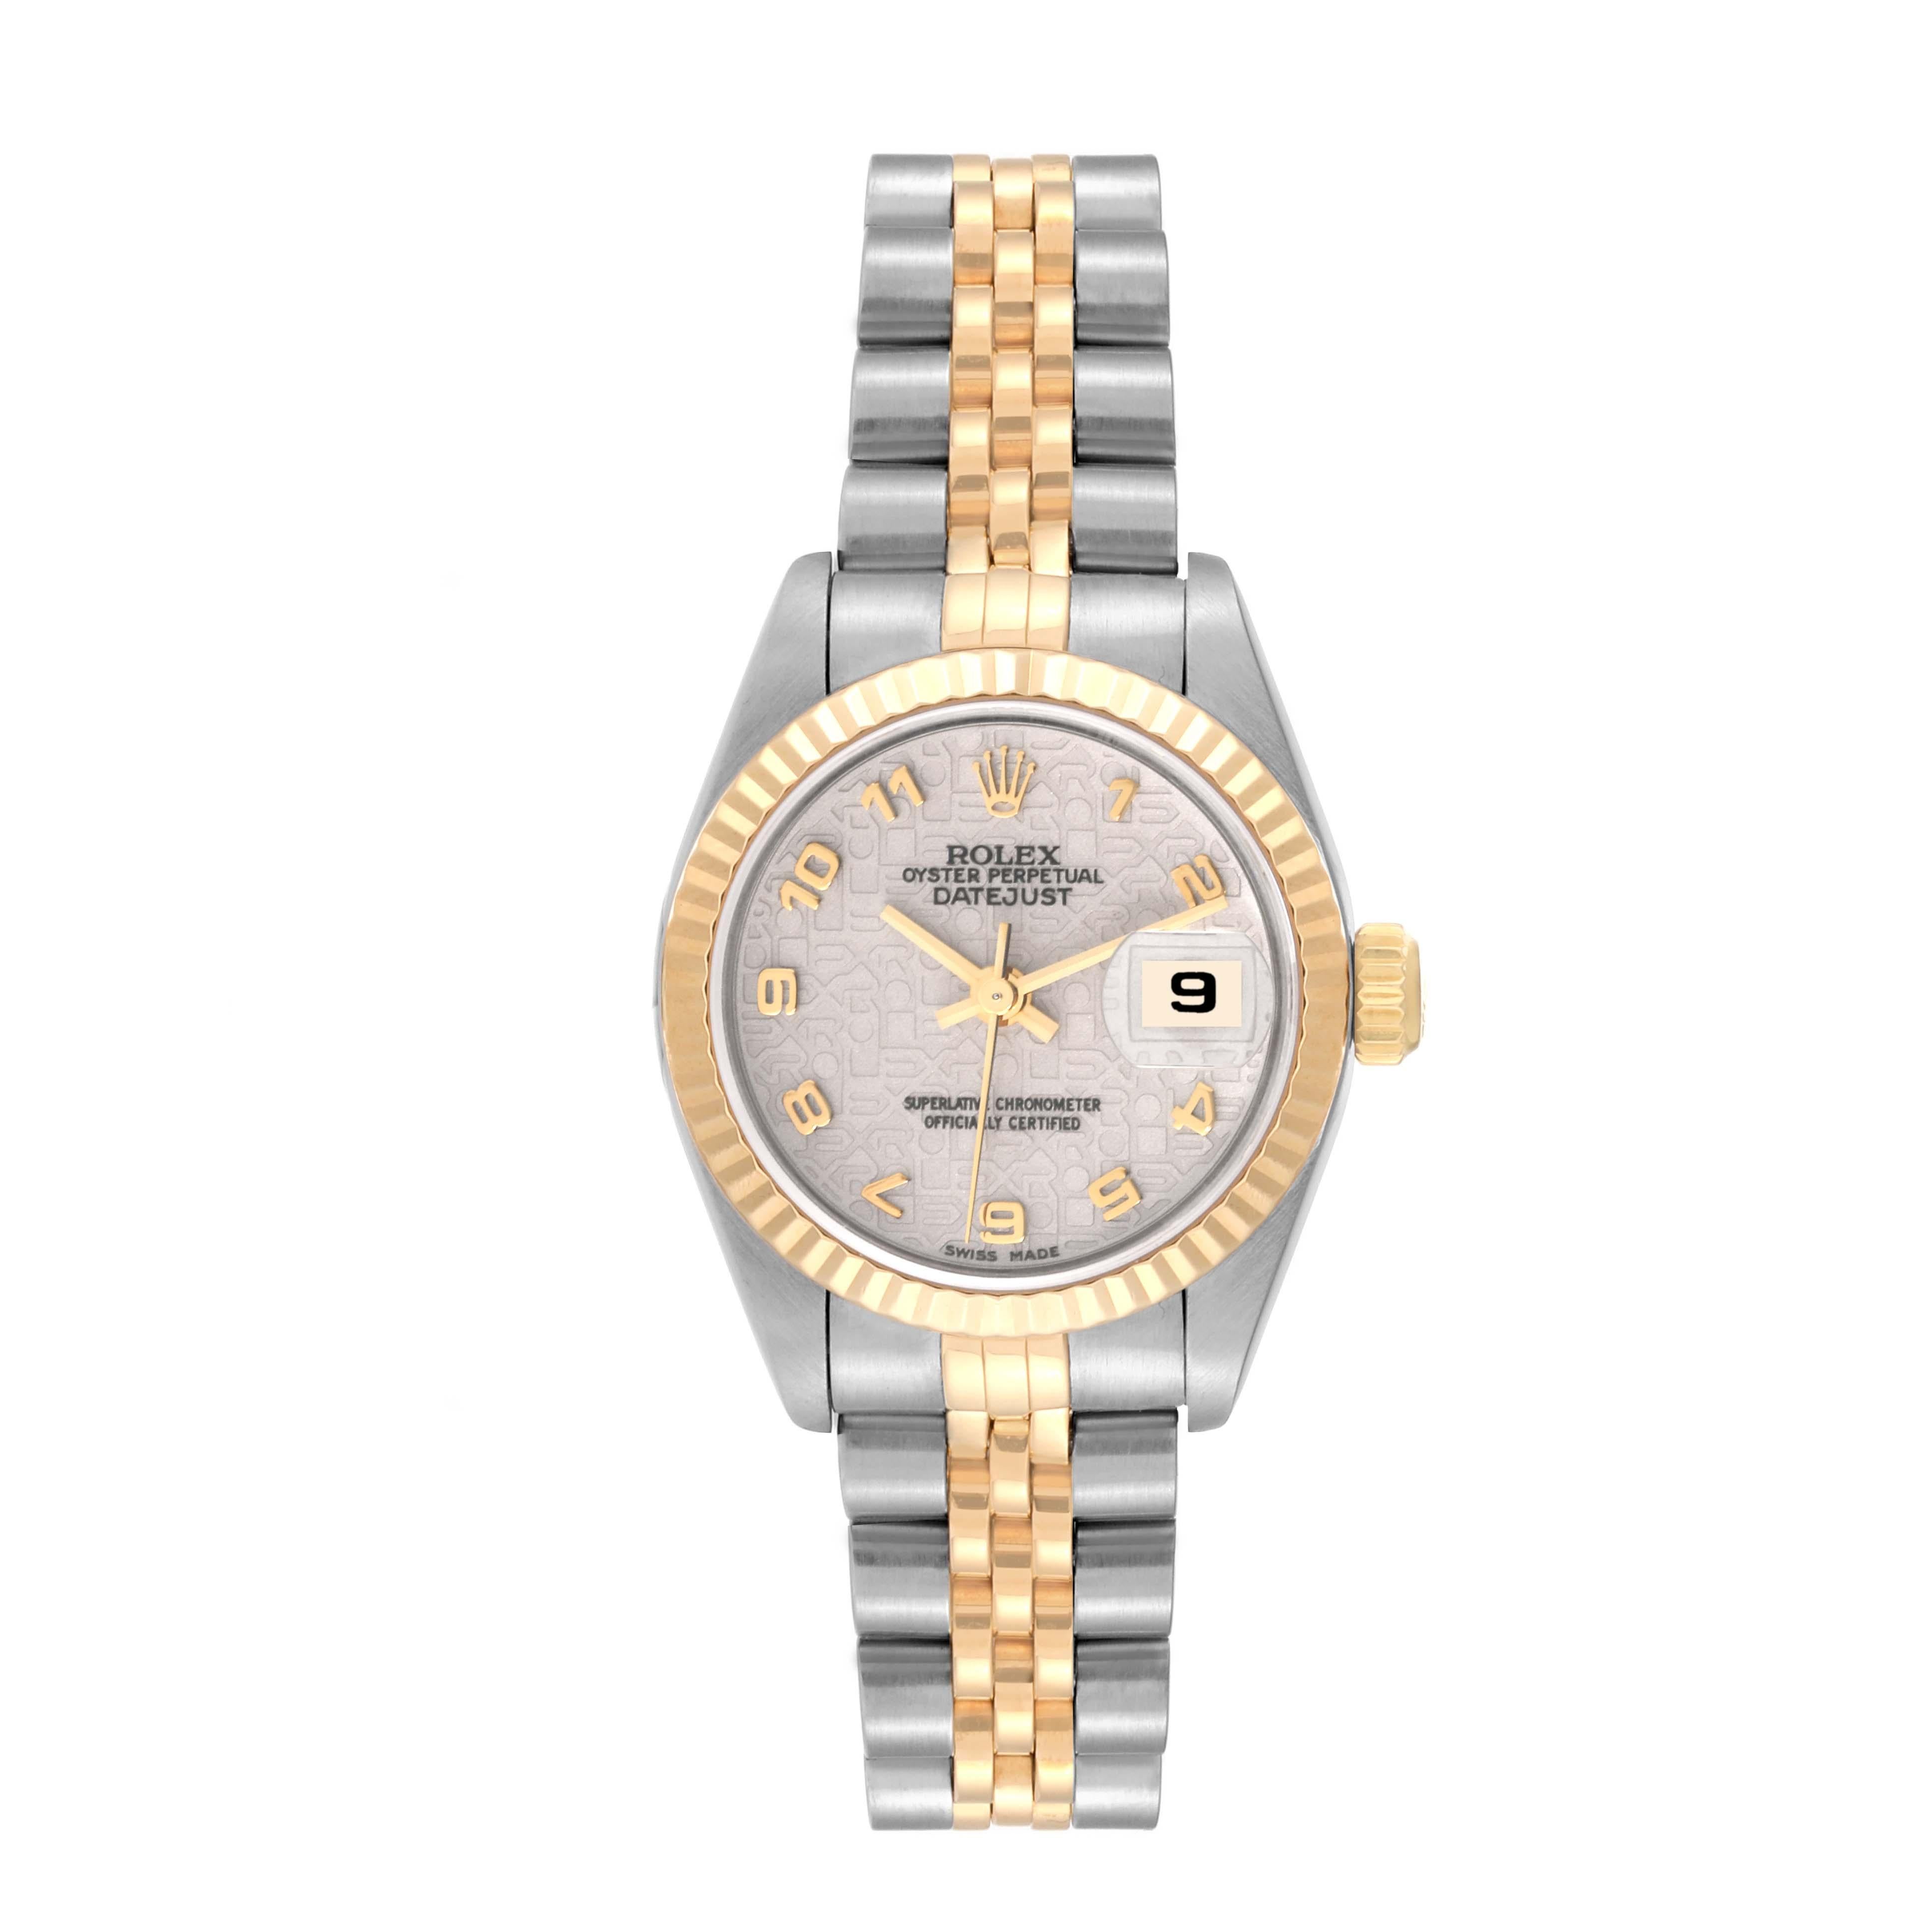 Rolex Datejust Steel Yellow Gold Ivory Anniversary Dial Ladies Watch 79173. Officially certified chronometer automatic self-winding movement. Stainless steel oyster case 26.0 mm in diameter. Rolex logo on an 18k yellow gold crown. 18k yellow gold